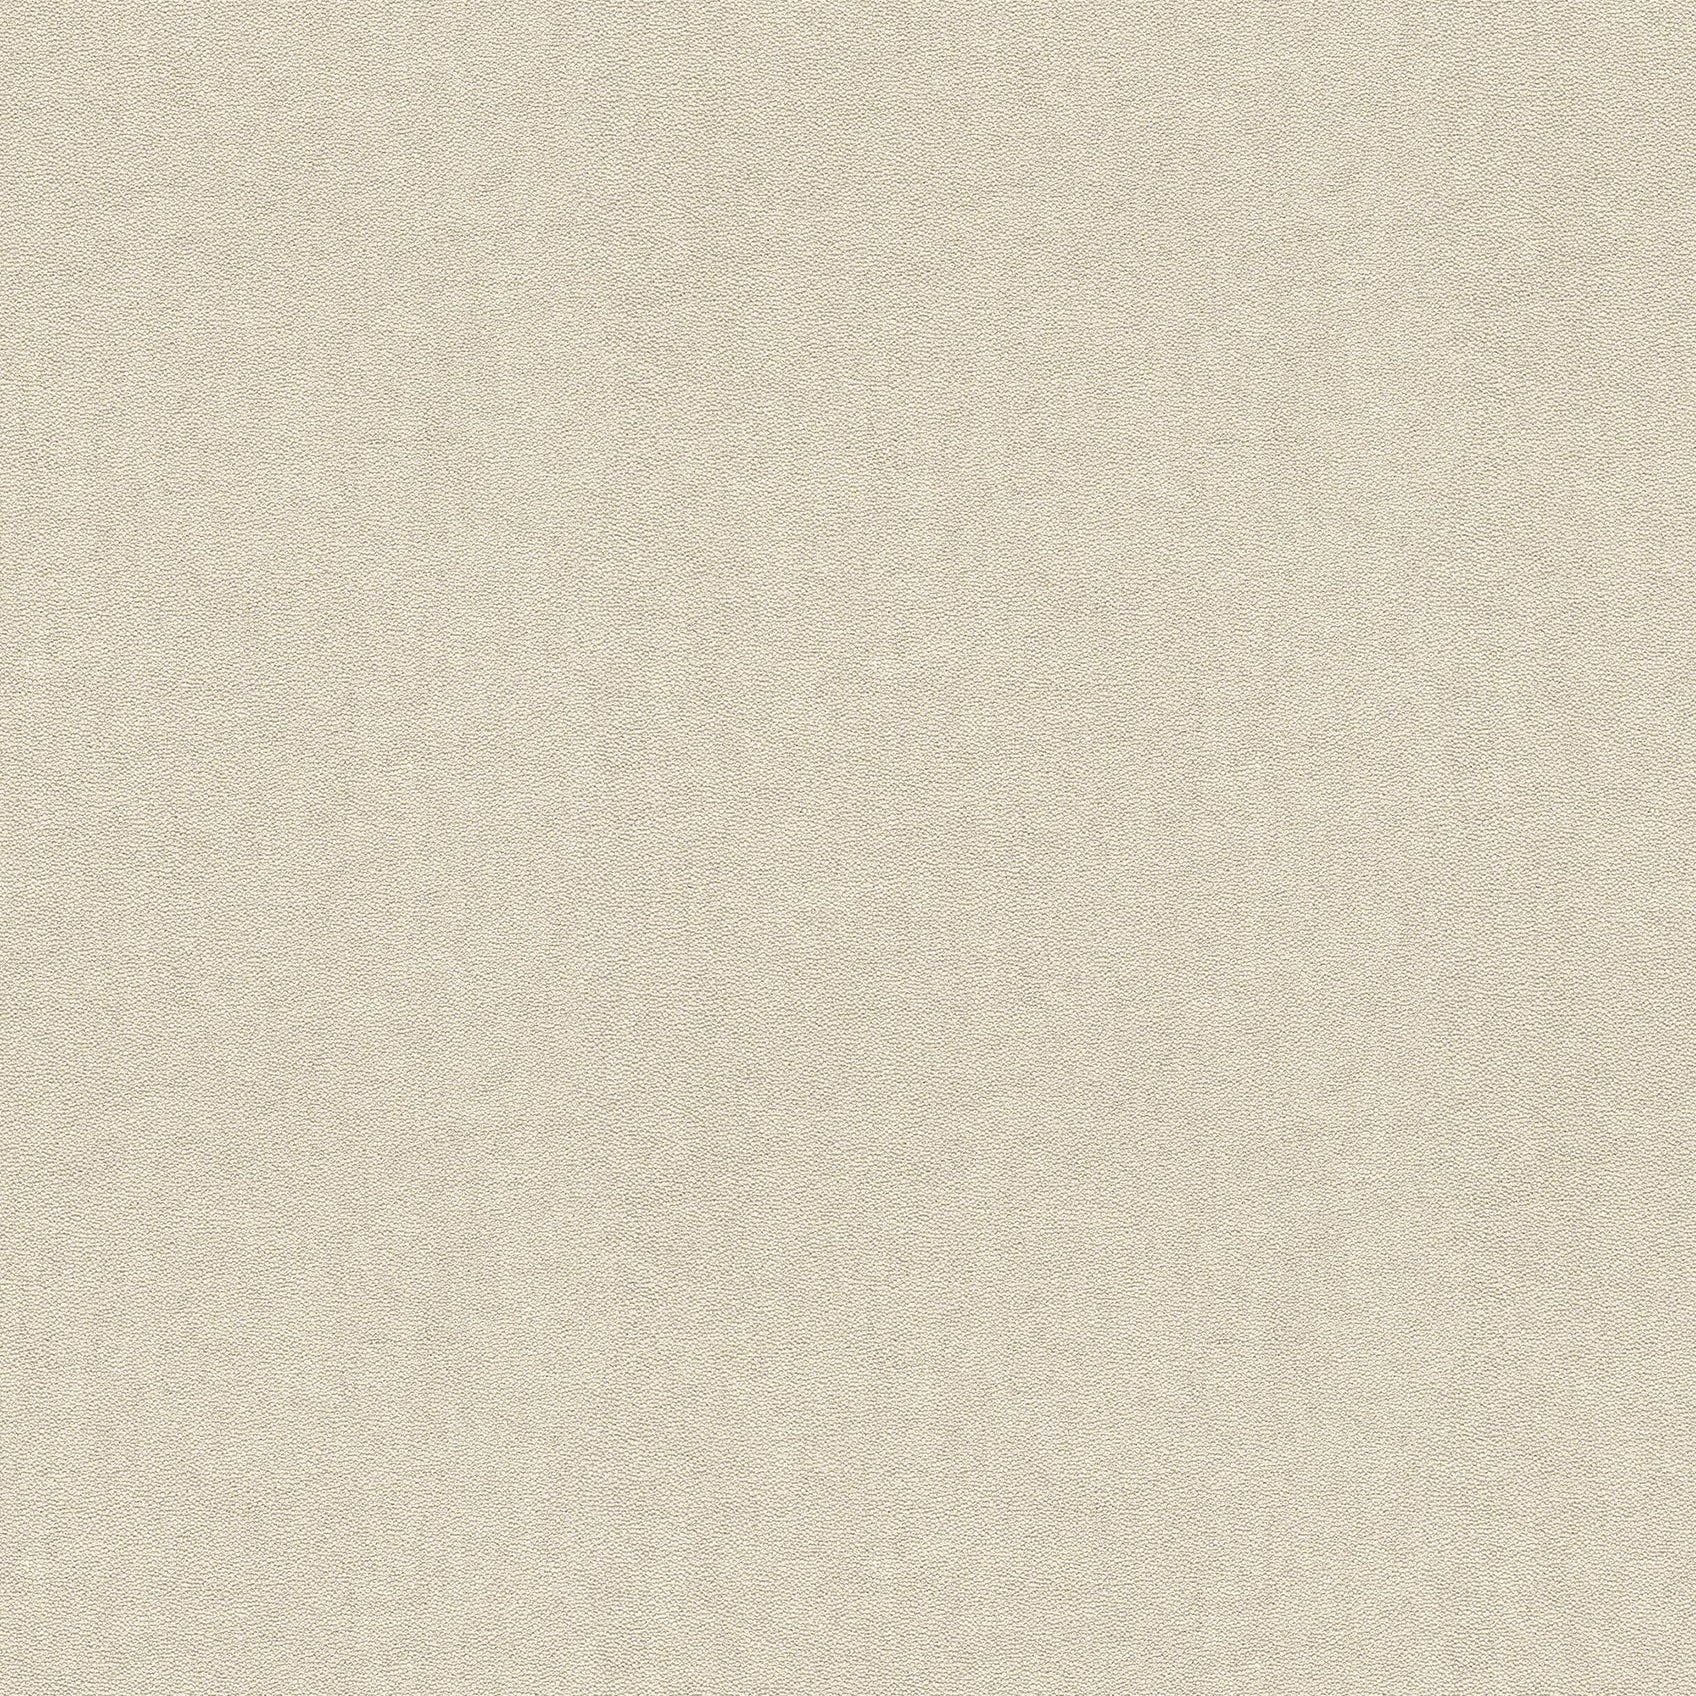 View 2835-C88650 Deluxe Neutrals Textured Wallpaper by Advantage